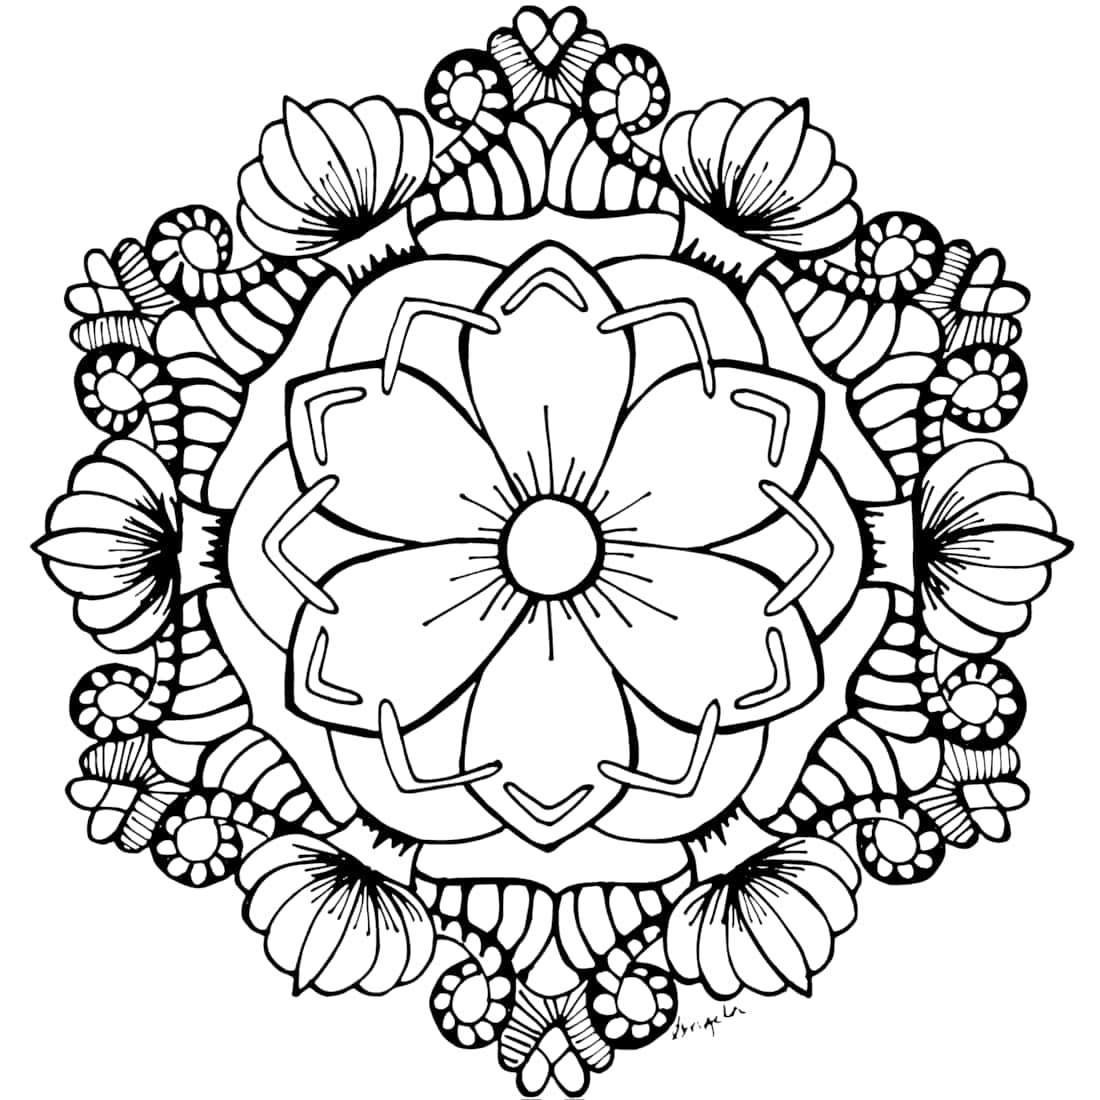 A Flower Coloring Page With A Flower In The Center